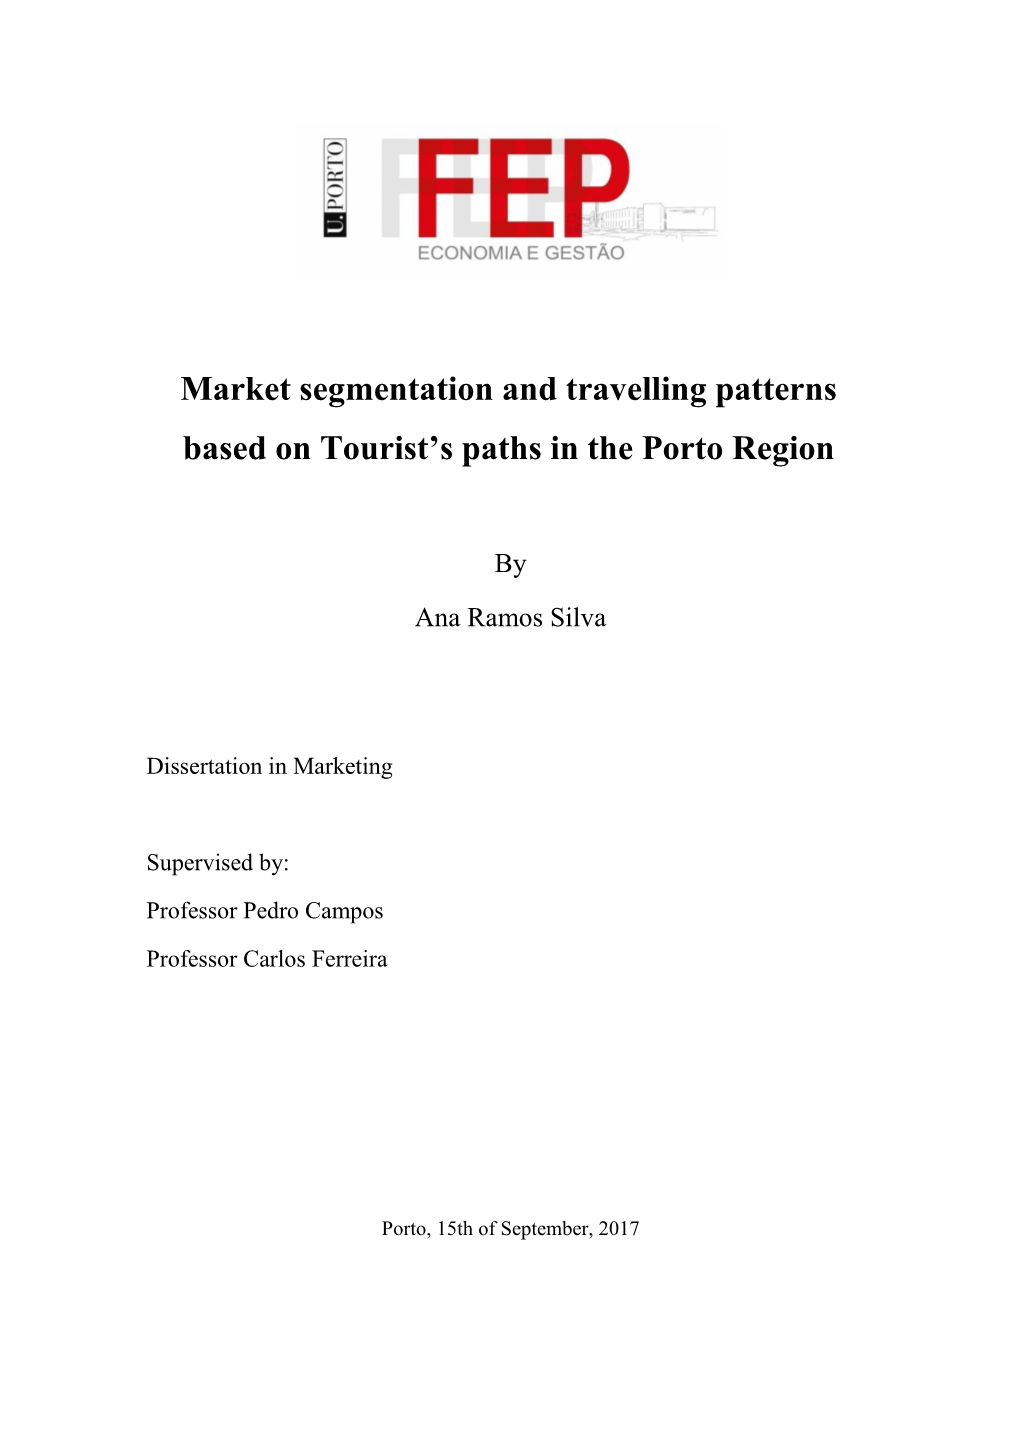 Market Segmentation and Travelling Patterns Based on Tourist's Paths In